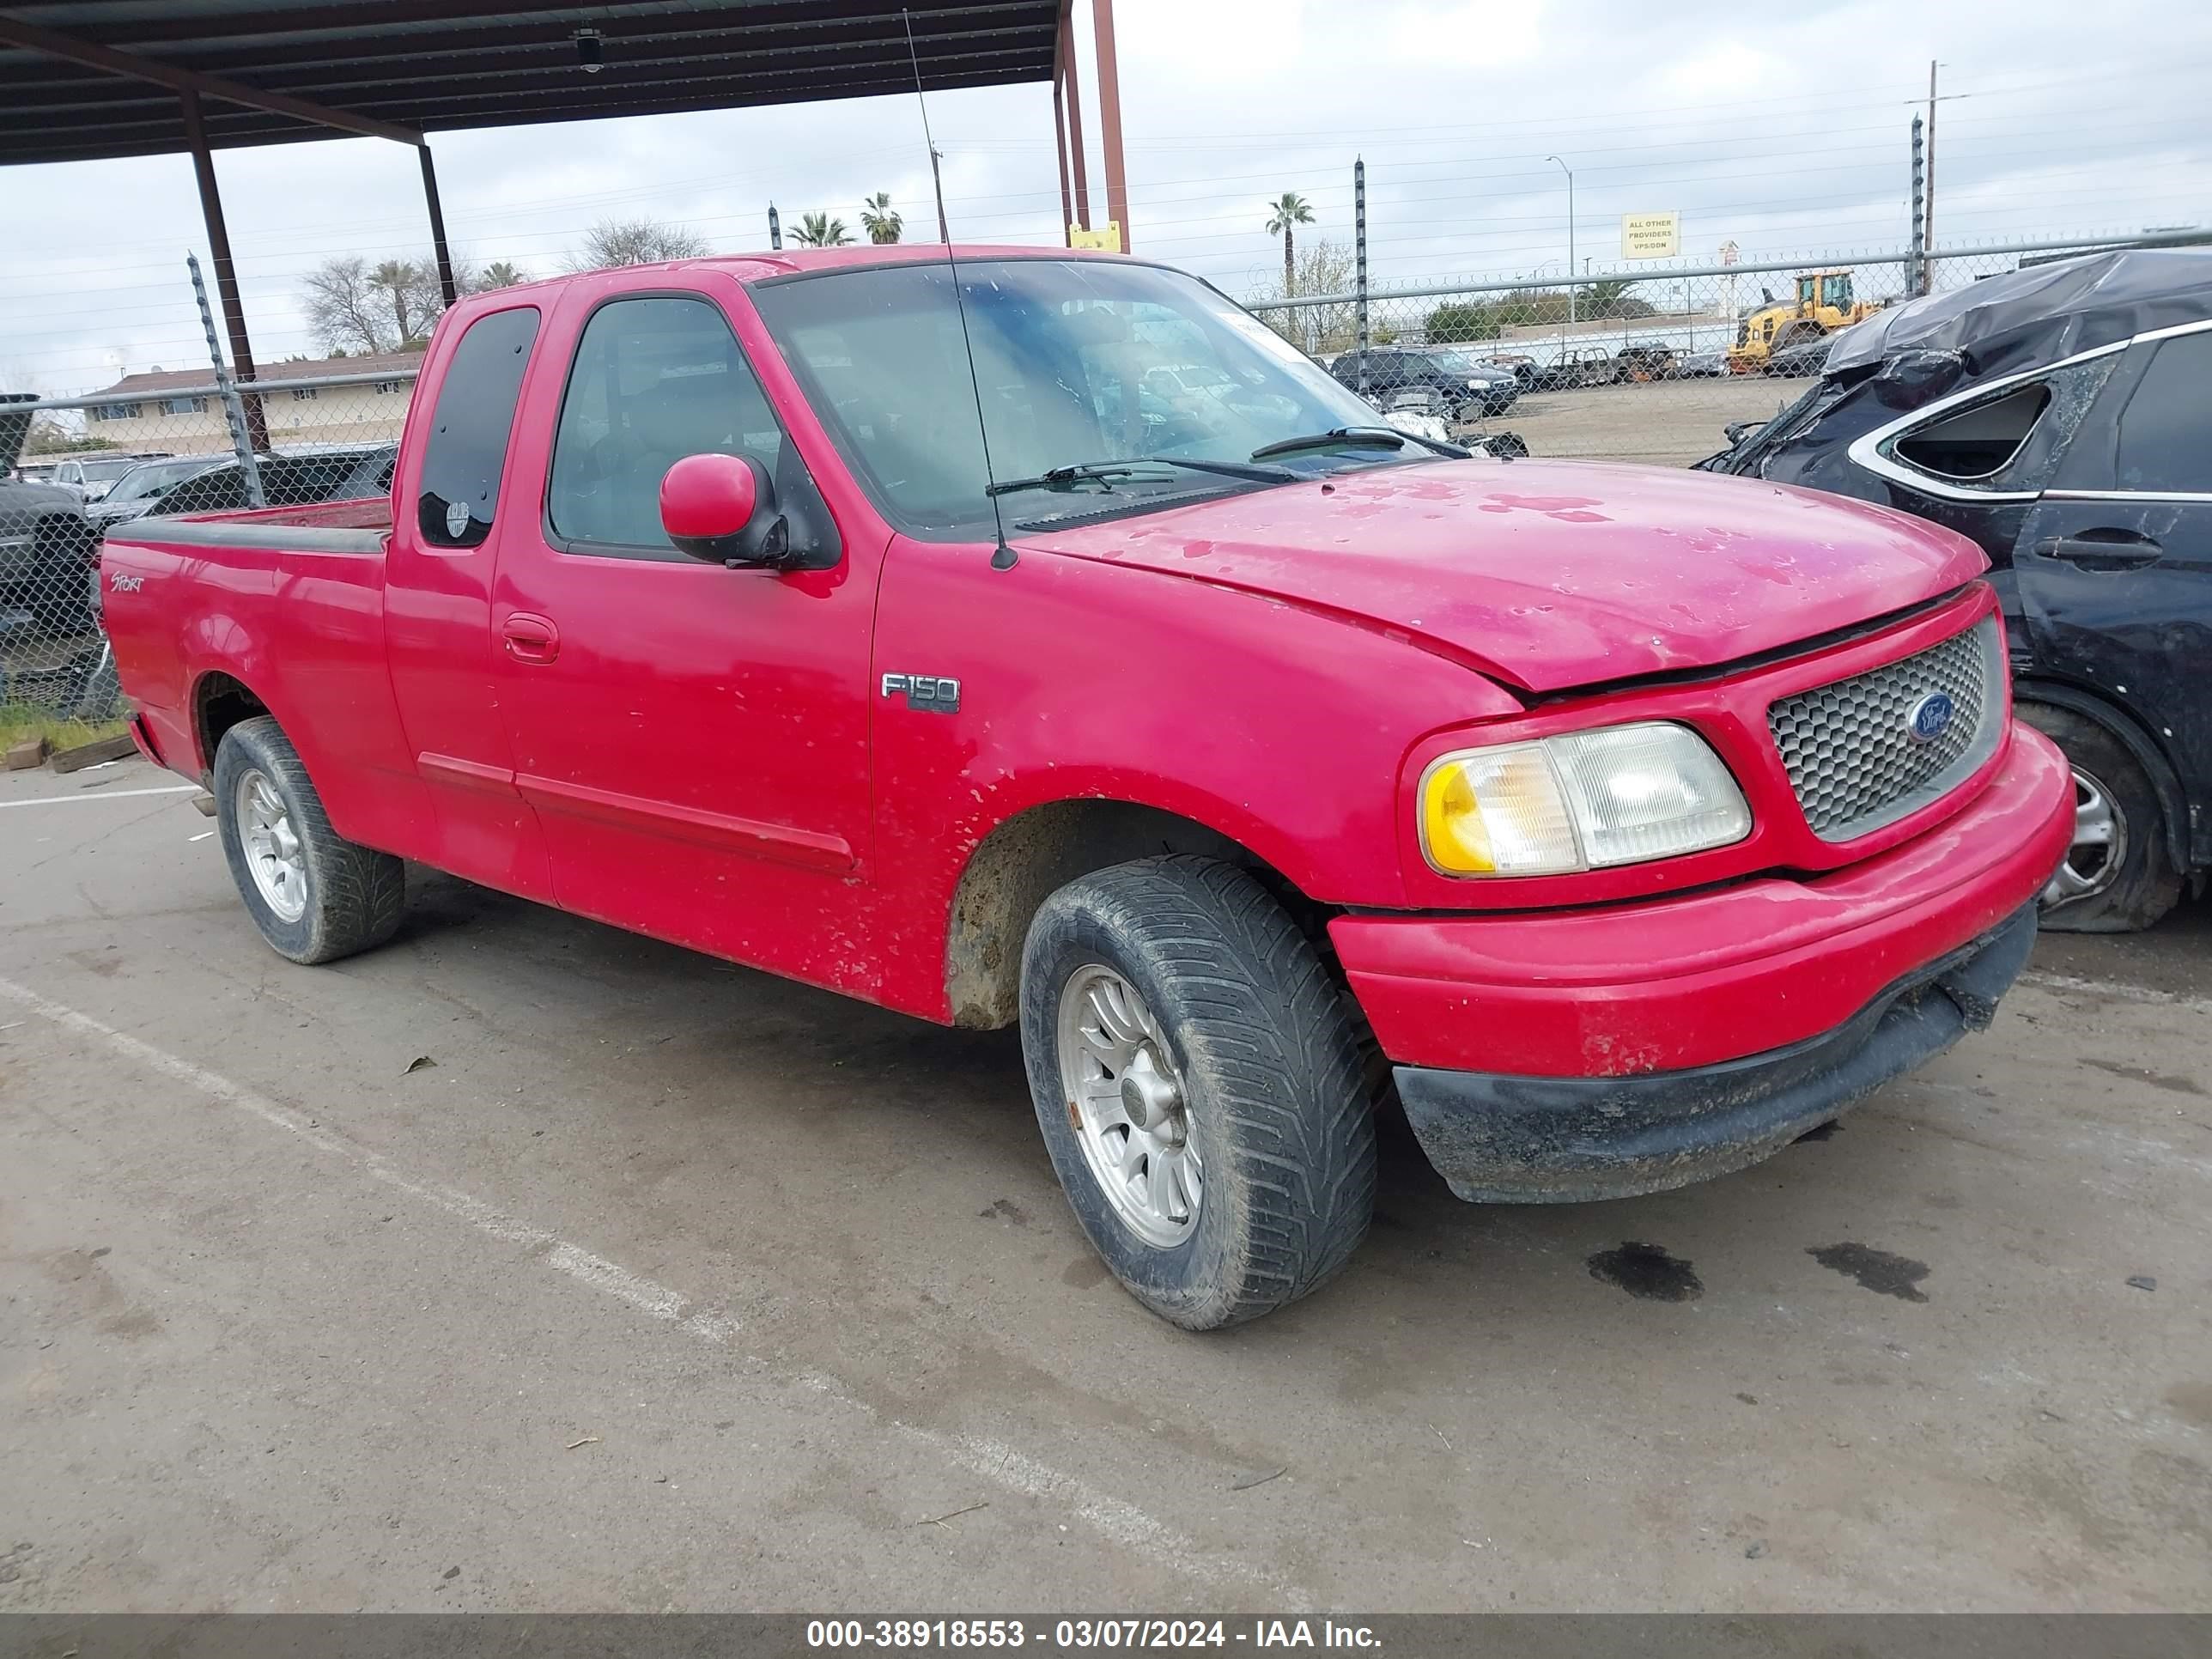 vin: 2FTZX17251CA42805 2FTZX17251CA42805 2001 ford f-150 4200 for Sale in 93705, 1805 N Lafayette Ave, Fresno, California, USA